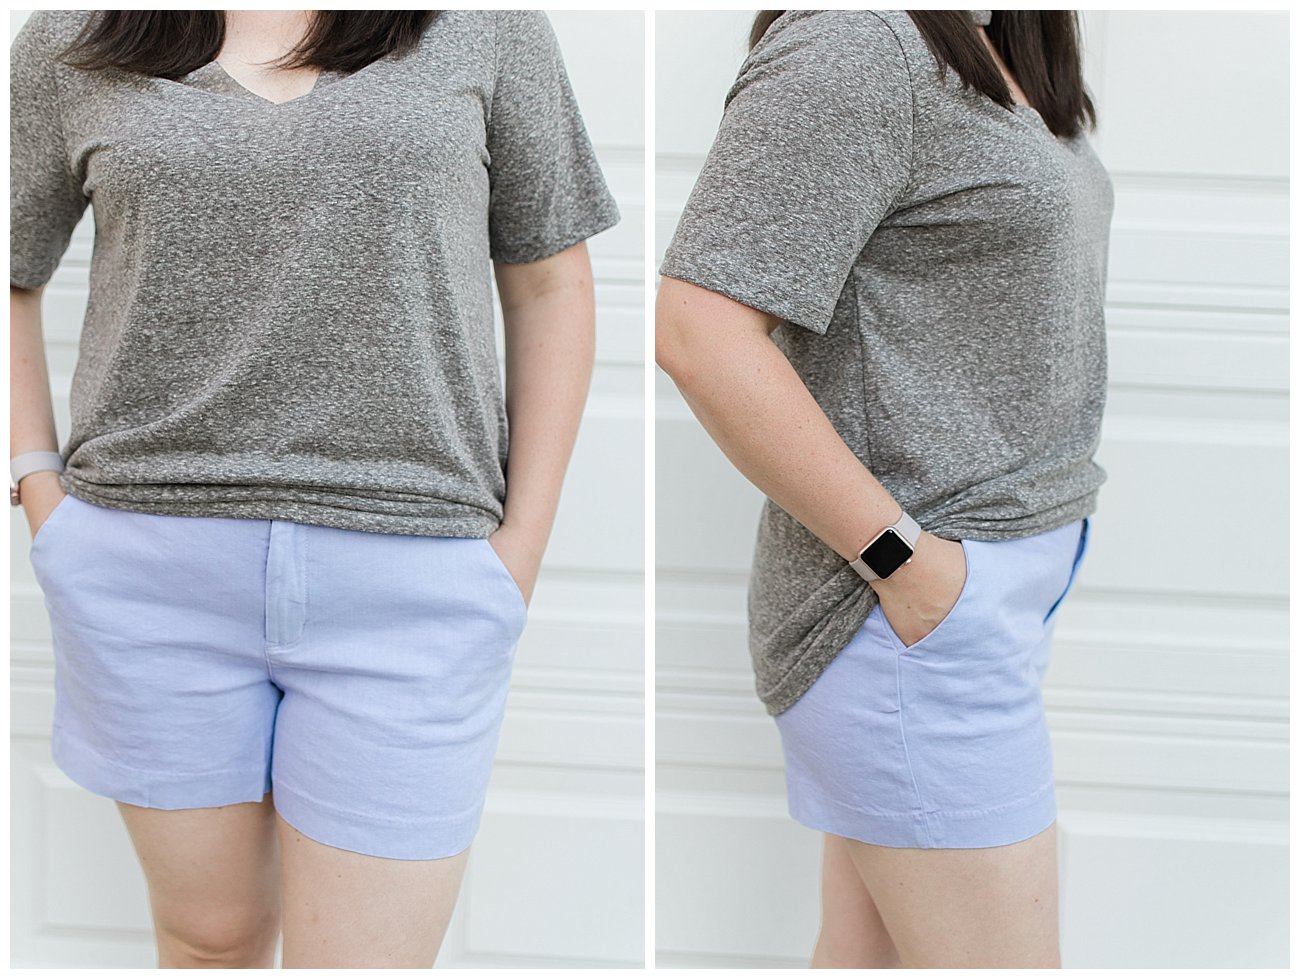 Stitch Fix Review #45 & $150 Stitch Fix Giveaway! by NC fashion blogger Still Being Molly